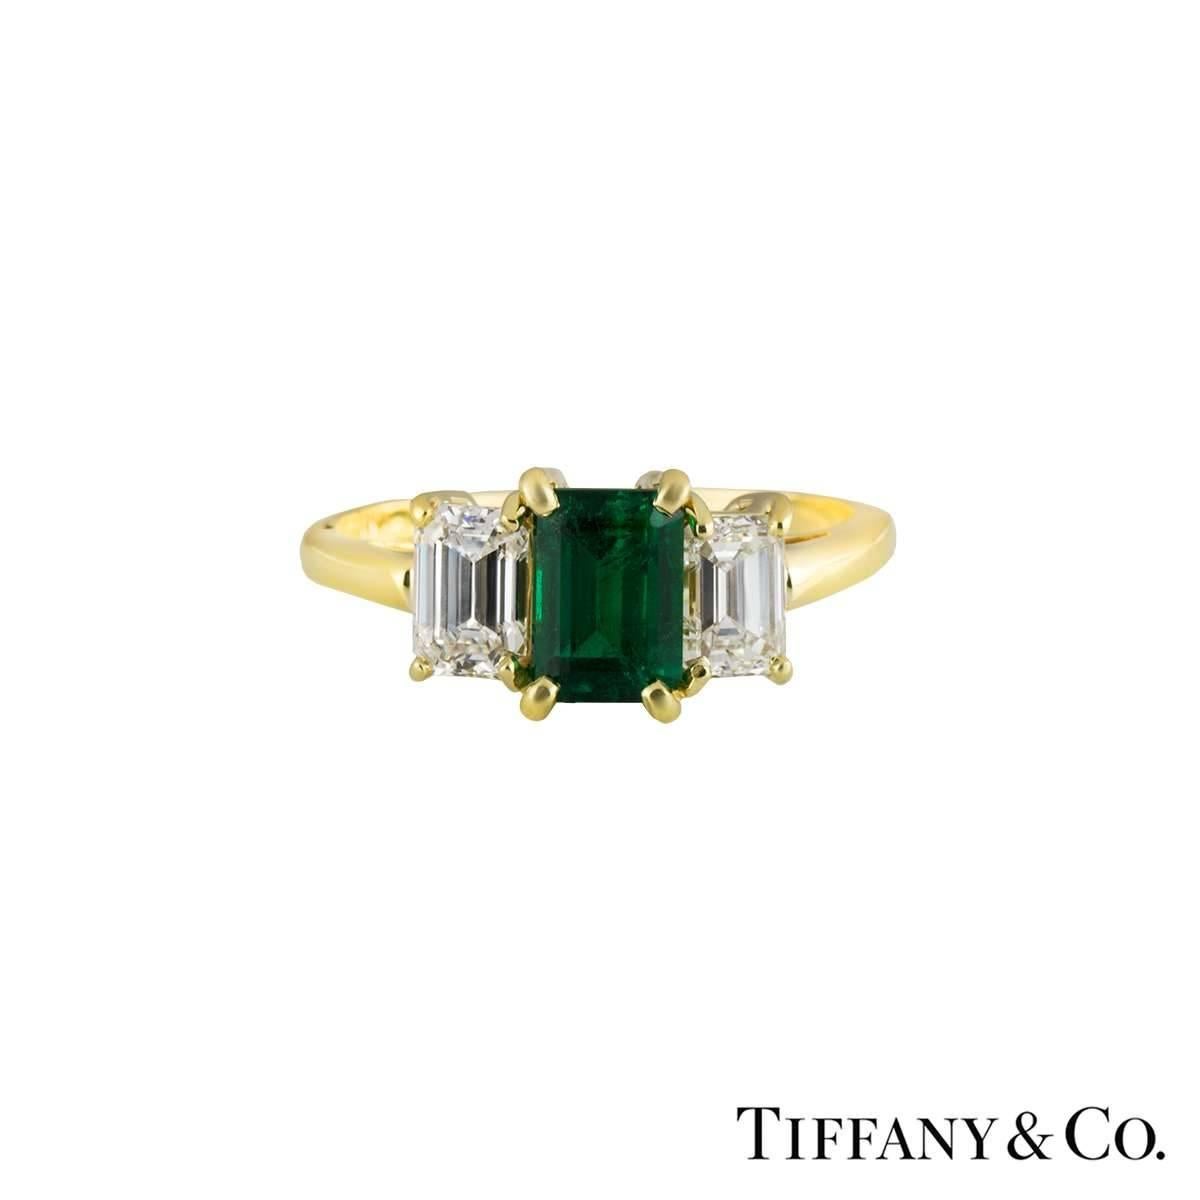 A luxurious 18k Tiffany & Co. diamond and emerald trilogy ring. The ring comprises of an emerald cut emerald set to the centre in a 4 claw setting, with a total approximate weight of 0.75ct and a deep green hue throughout. There are 2 emerald cut